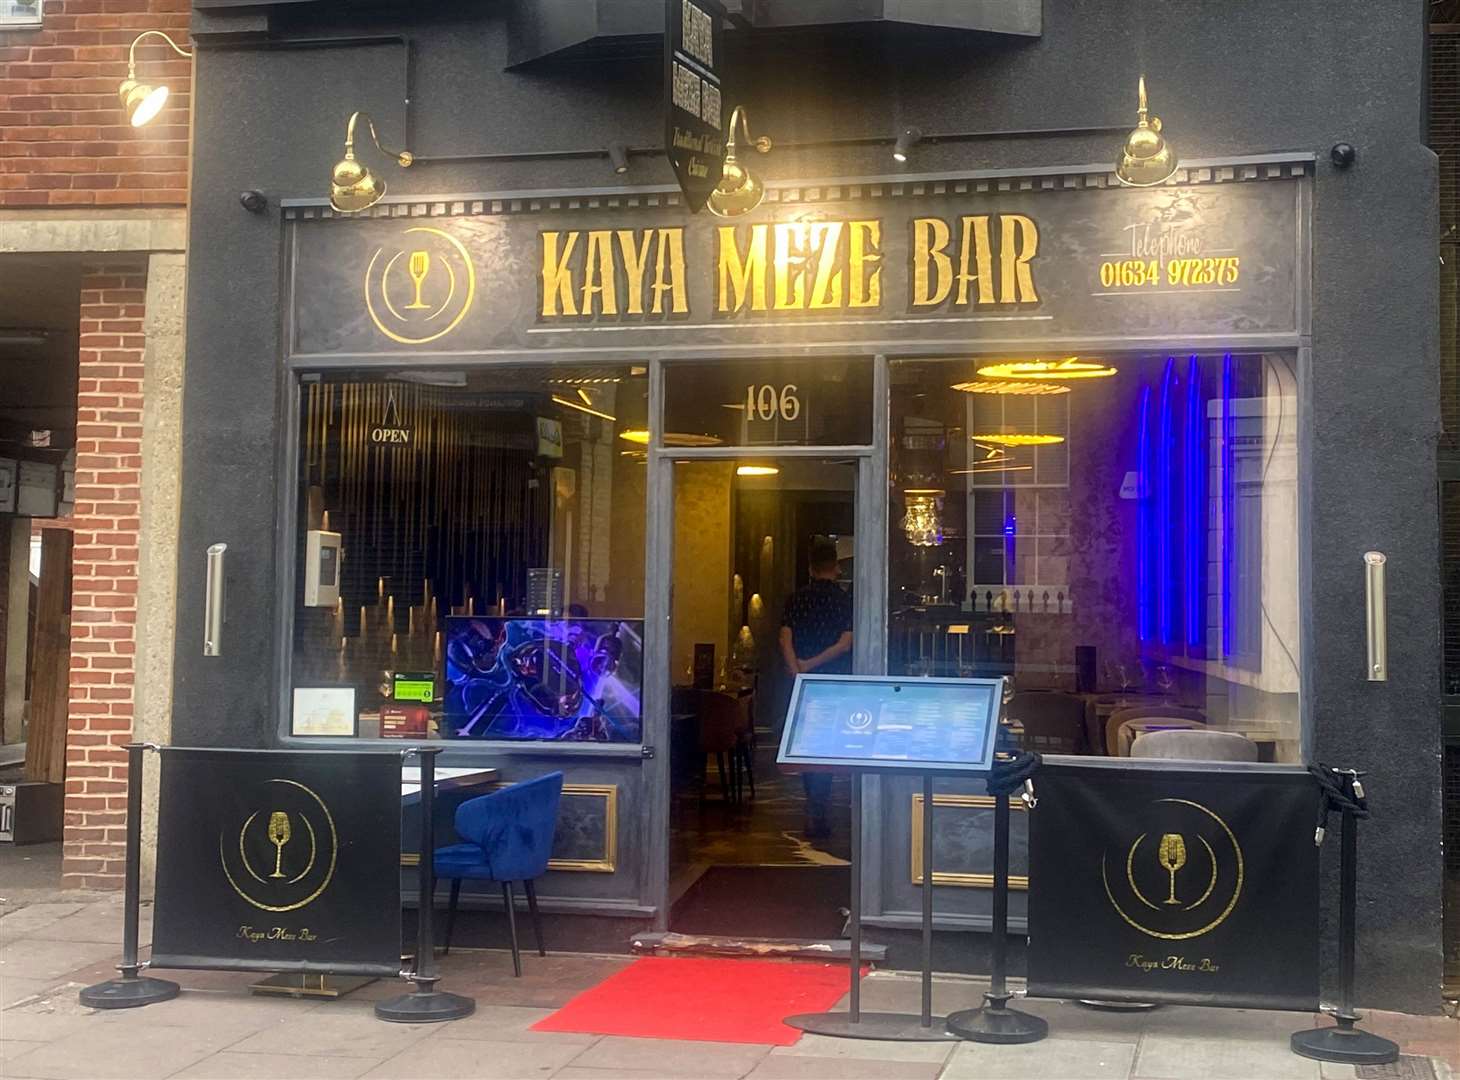 We reviewed the food and drink at Kaya Meze Bar in Rochester